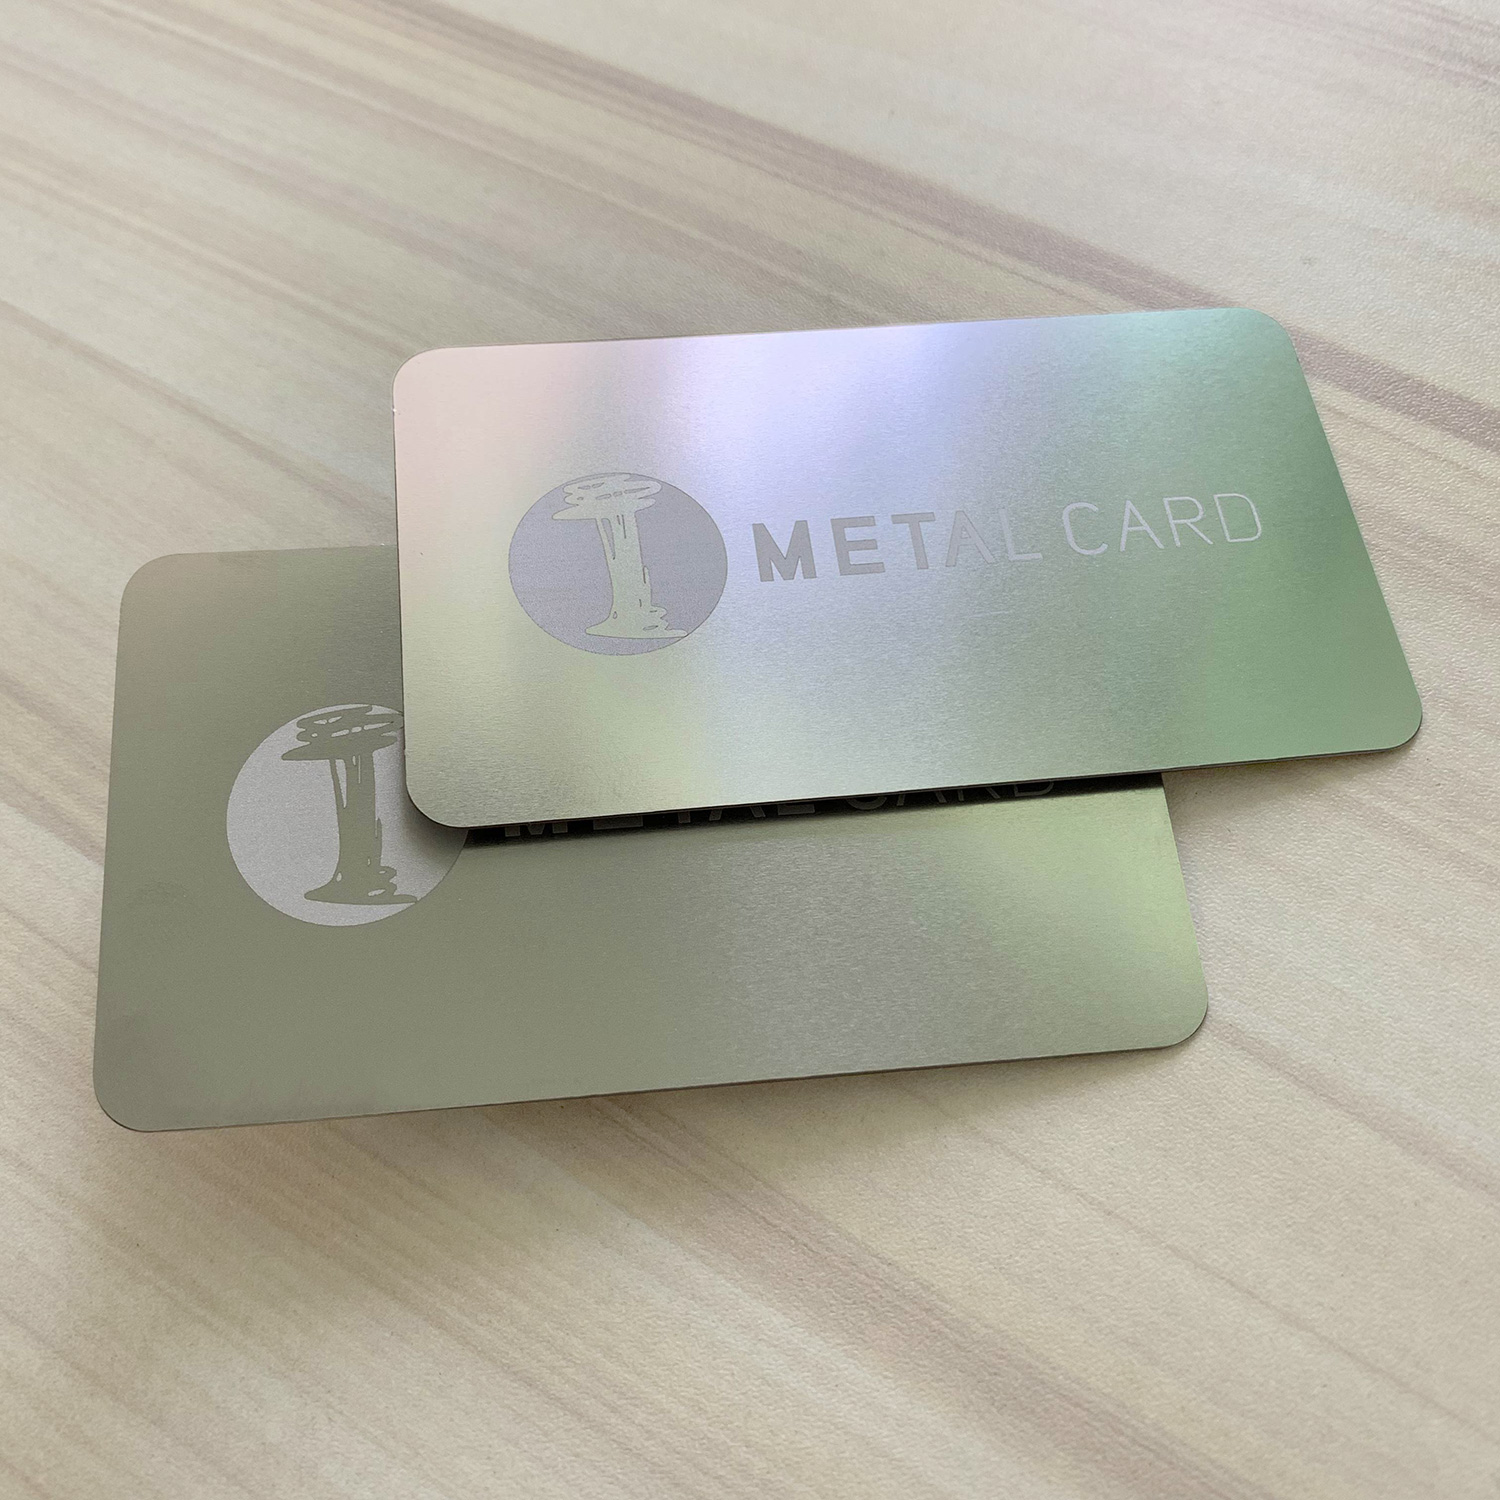 Stainless steel silver metal business cards